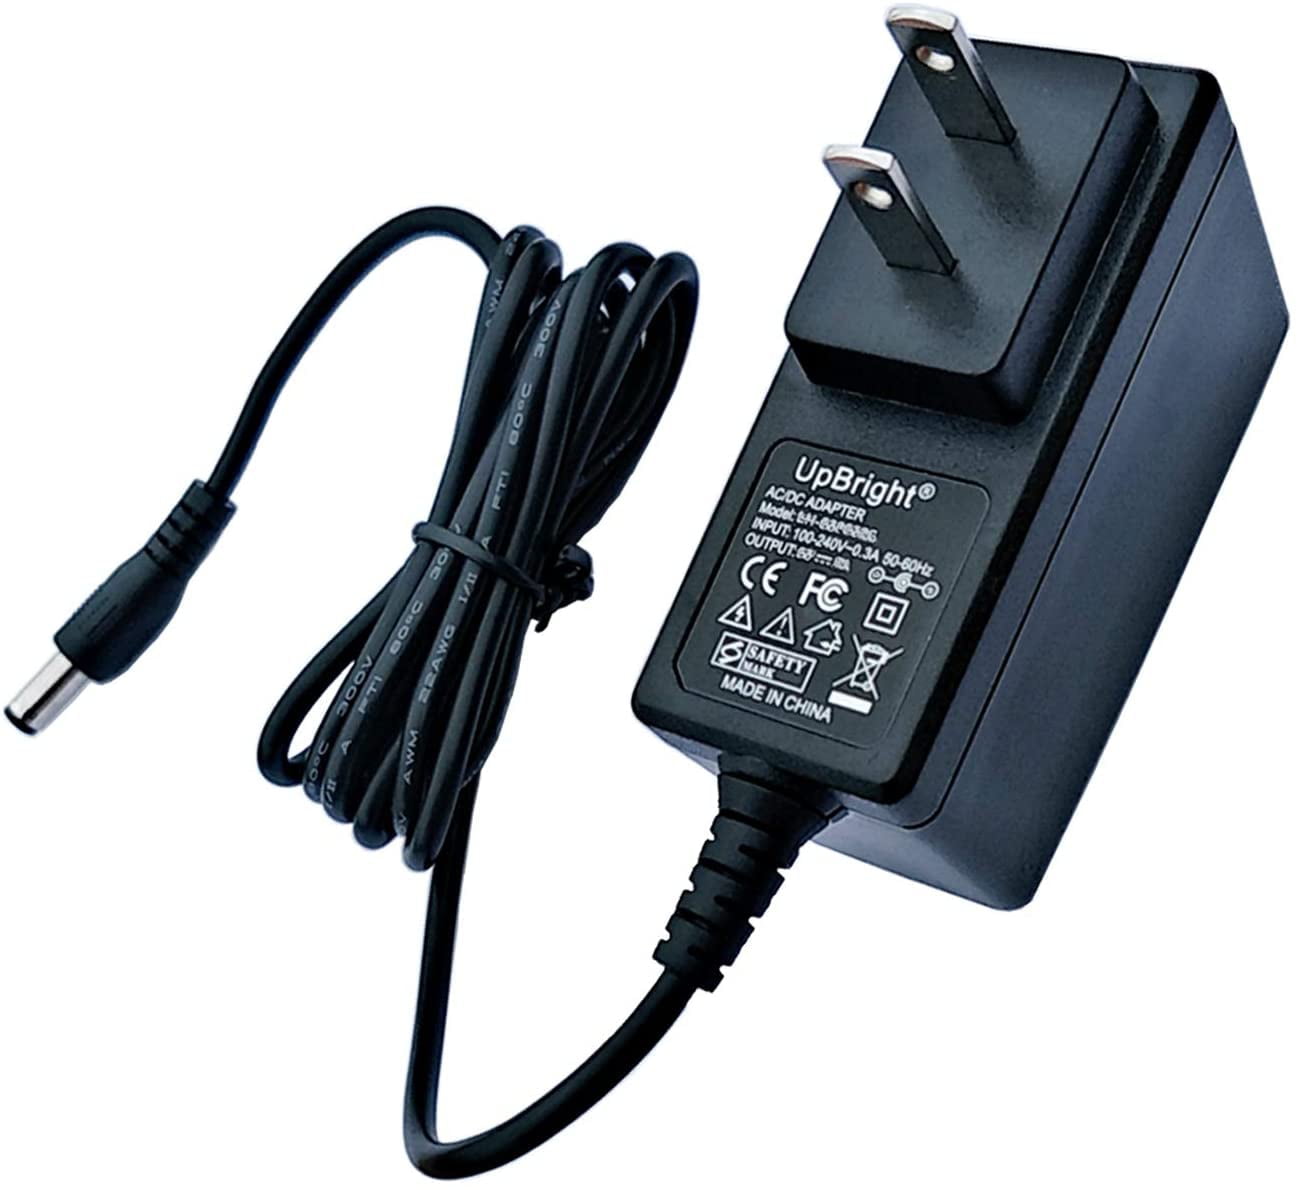 UpBright AC/DC Adapter Compatible with Hon-Kwang HK-AD-219U050-US HK-AD-219U050US Part# W15155040014 W13113202014 21.9V 0.5A Class 2 Switching Power Supply Battery Charger - Walmart.com